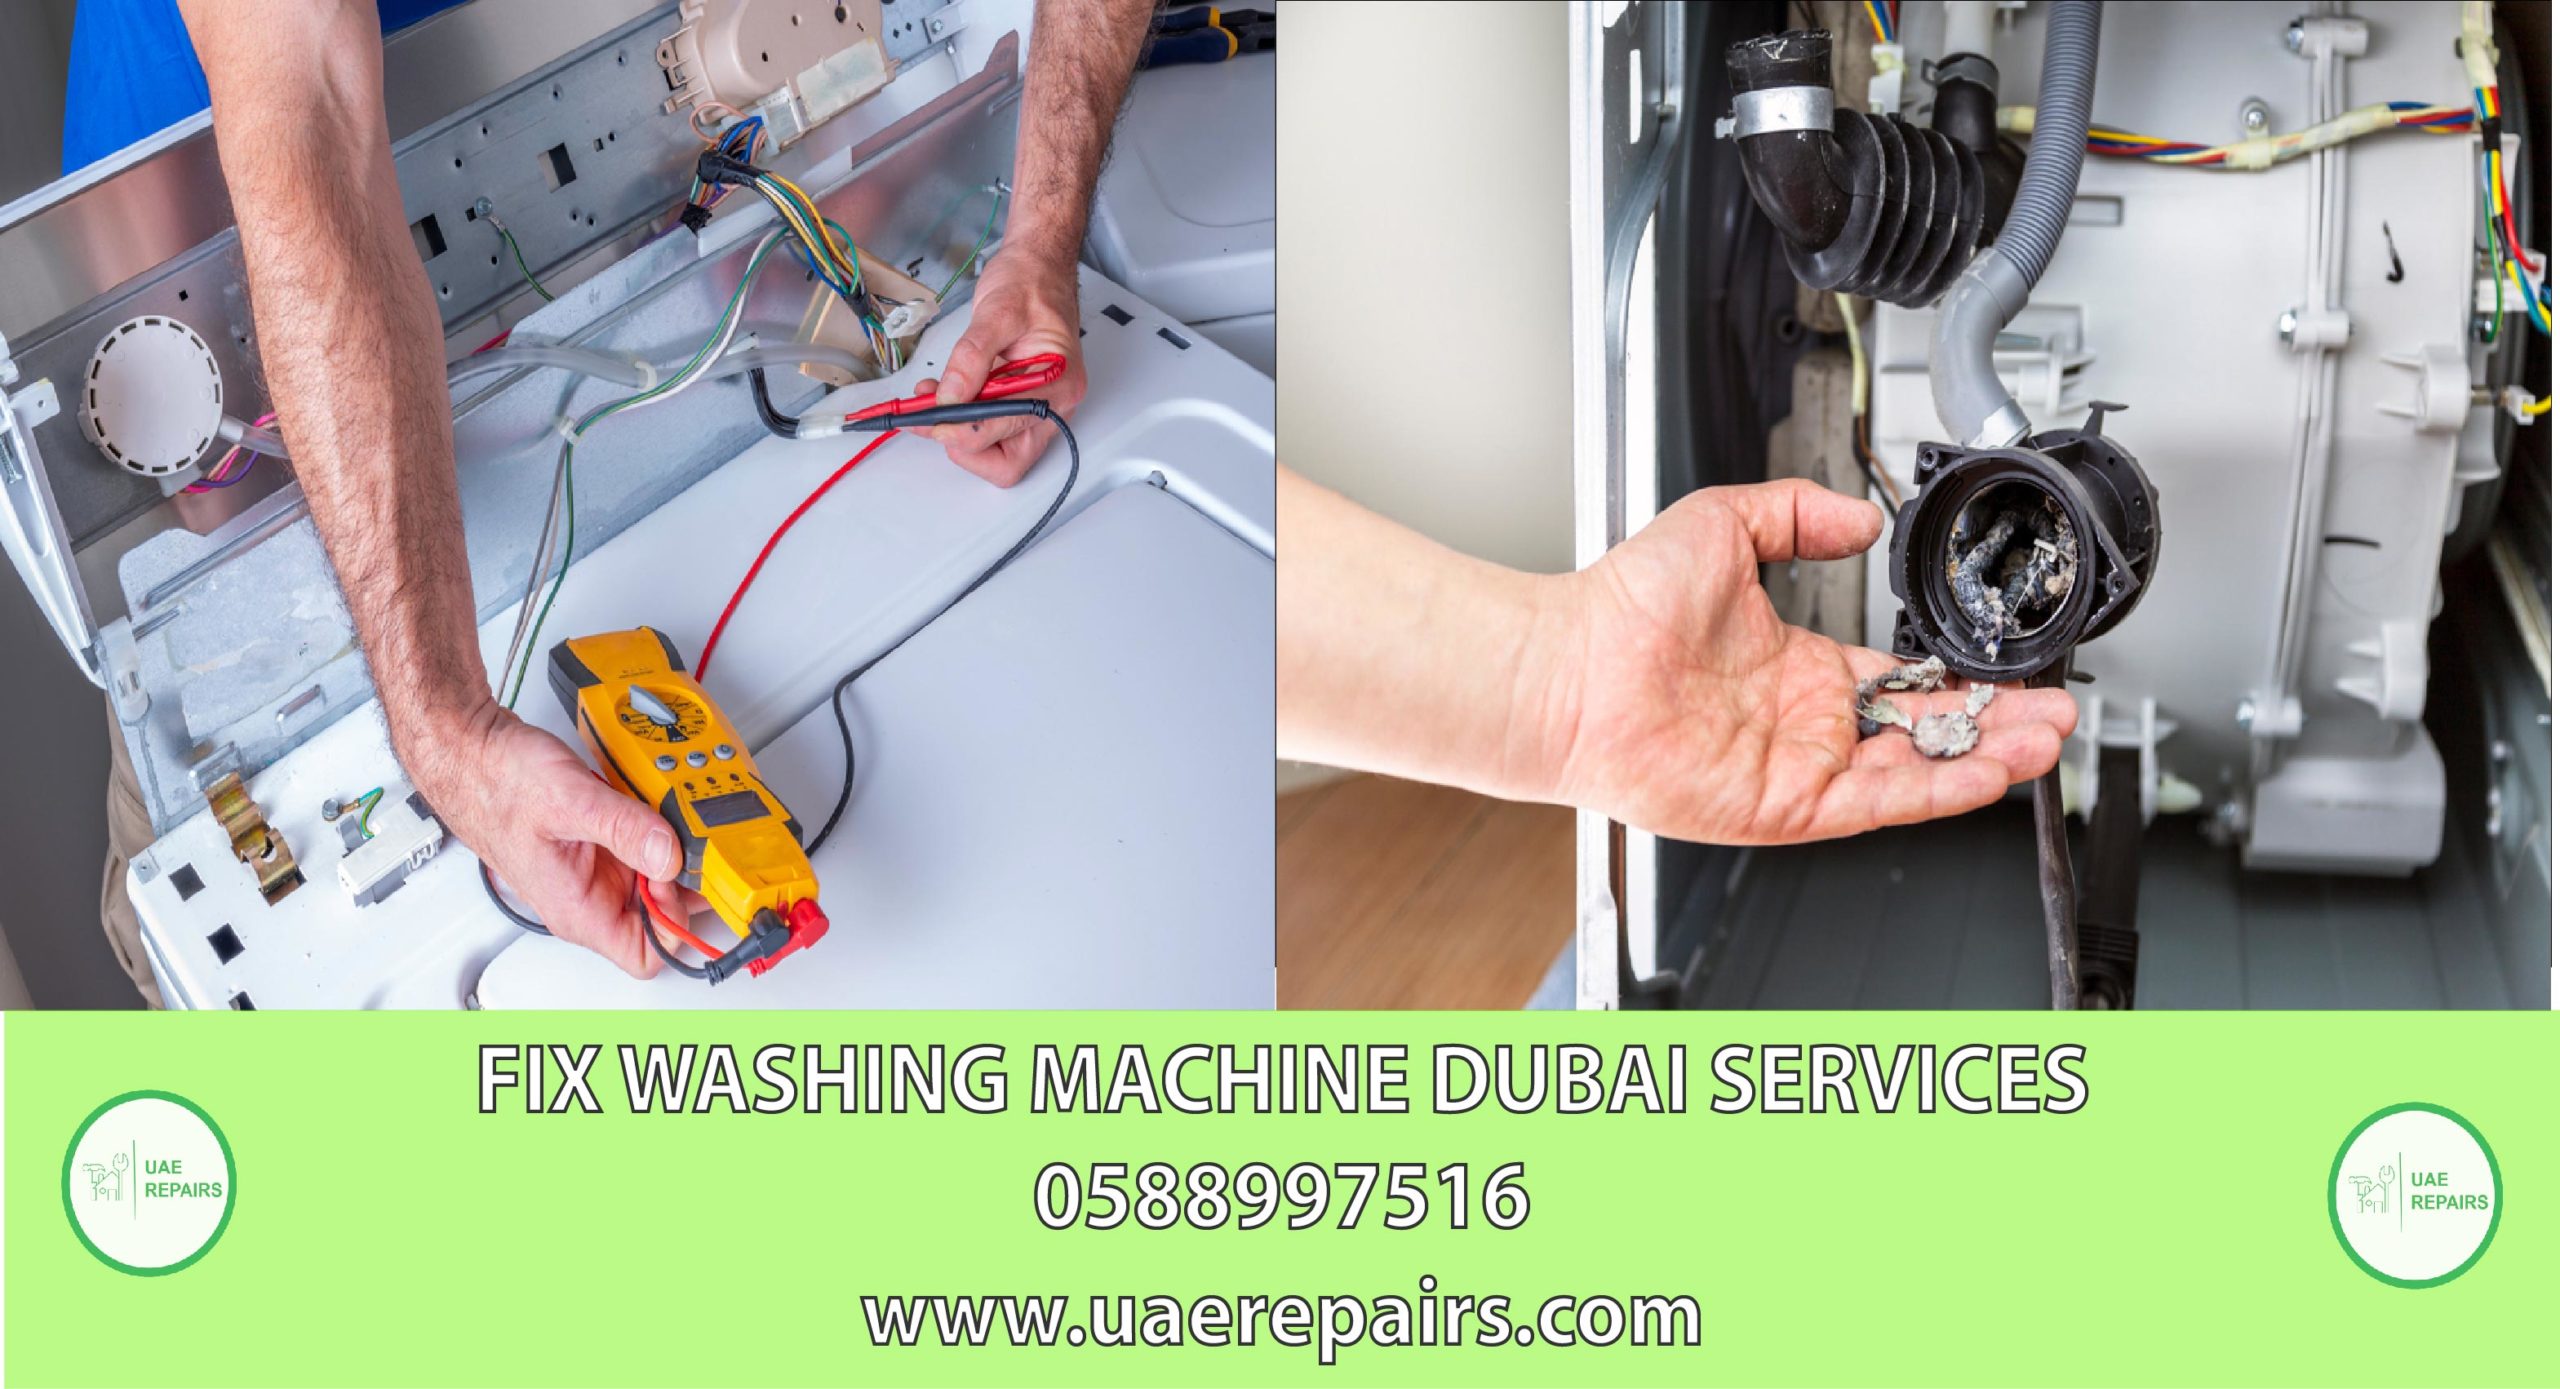 Our Fix Washing Machine Services